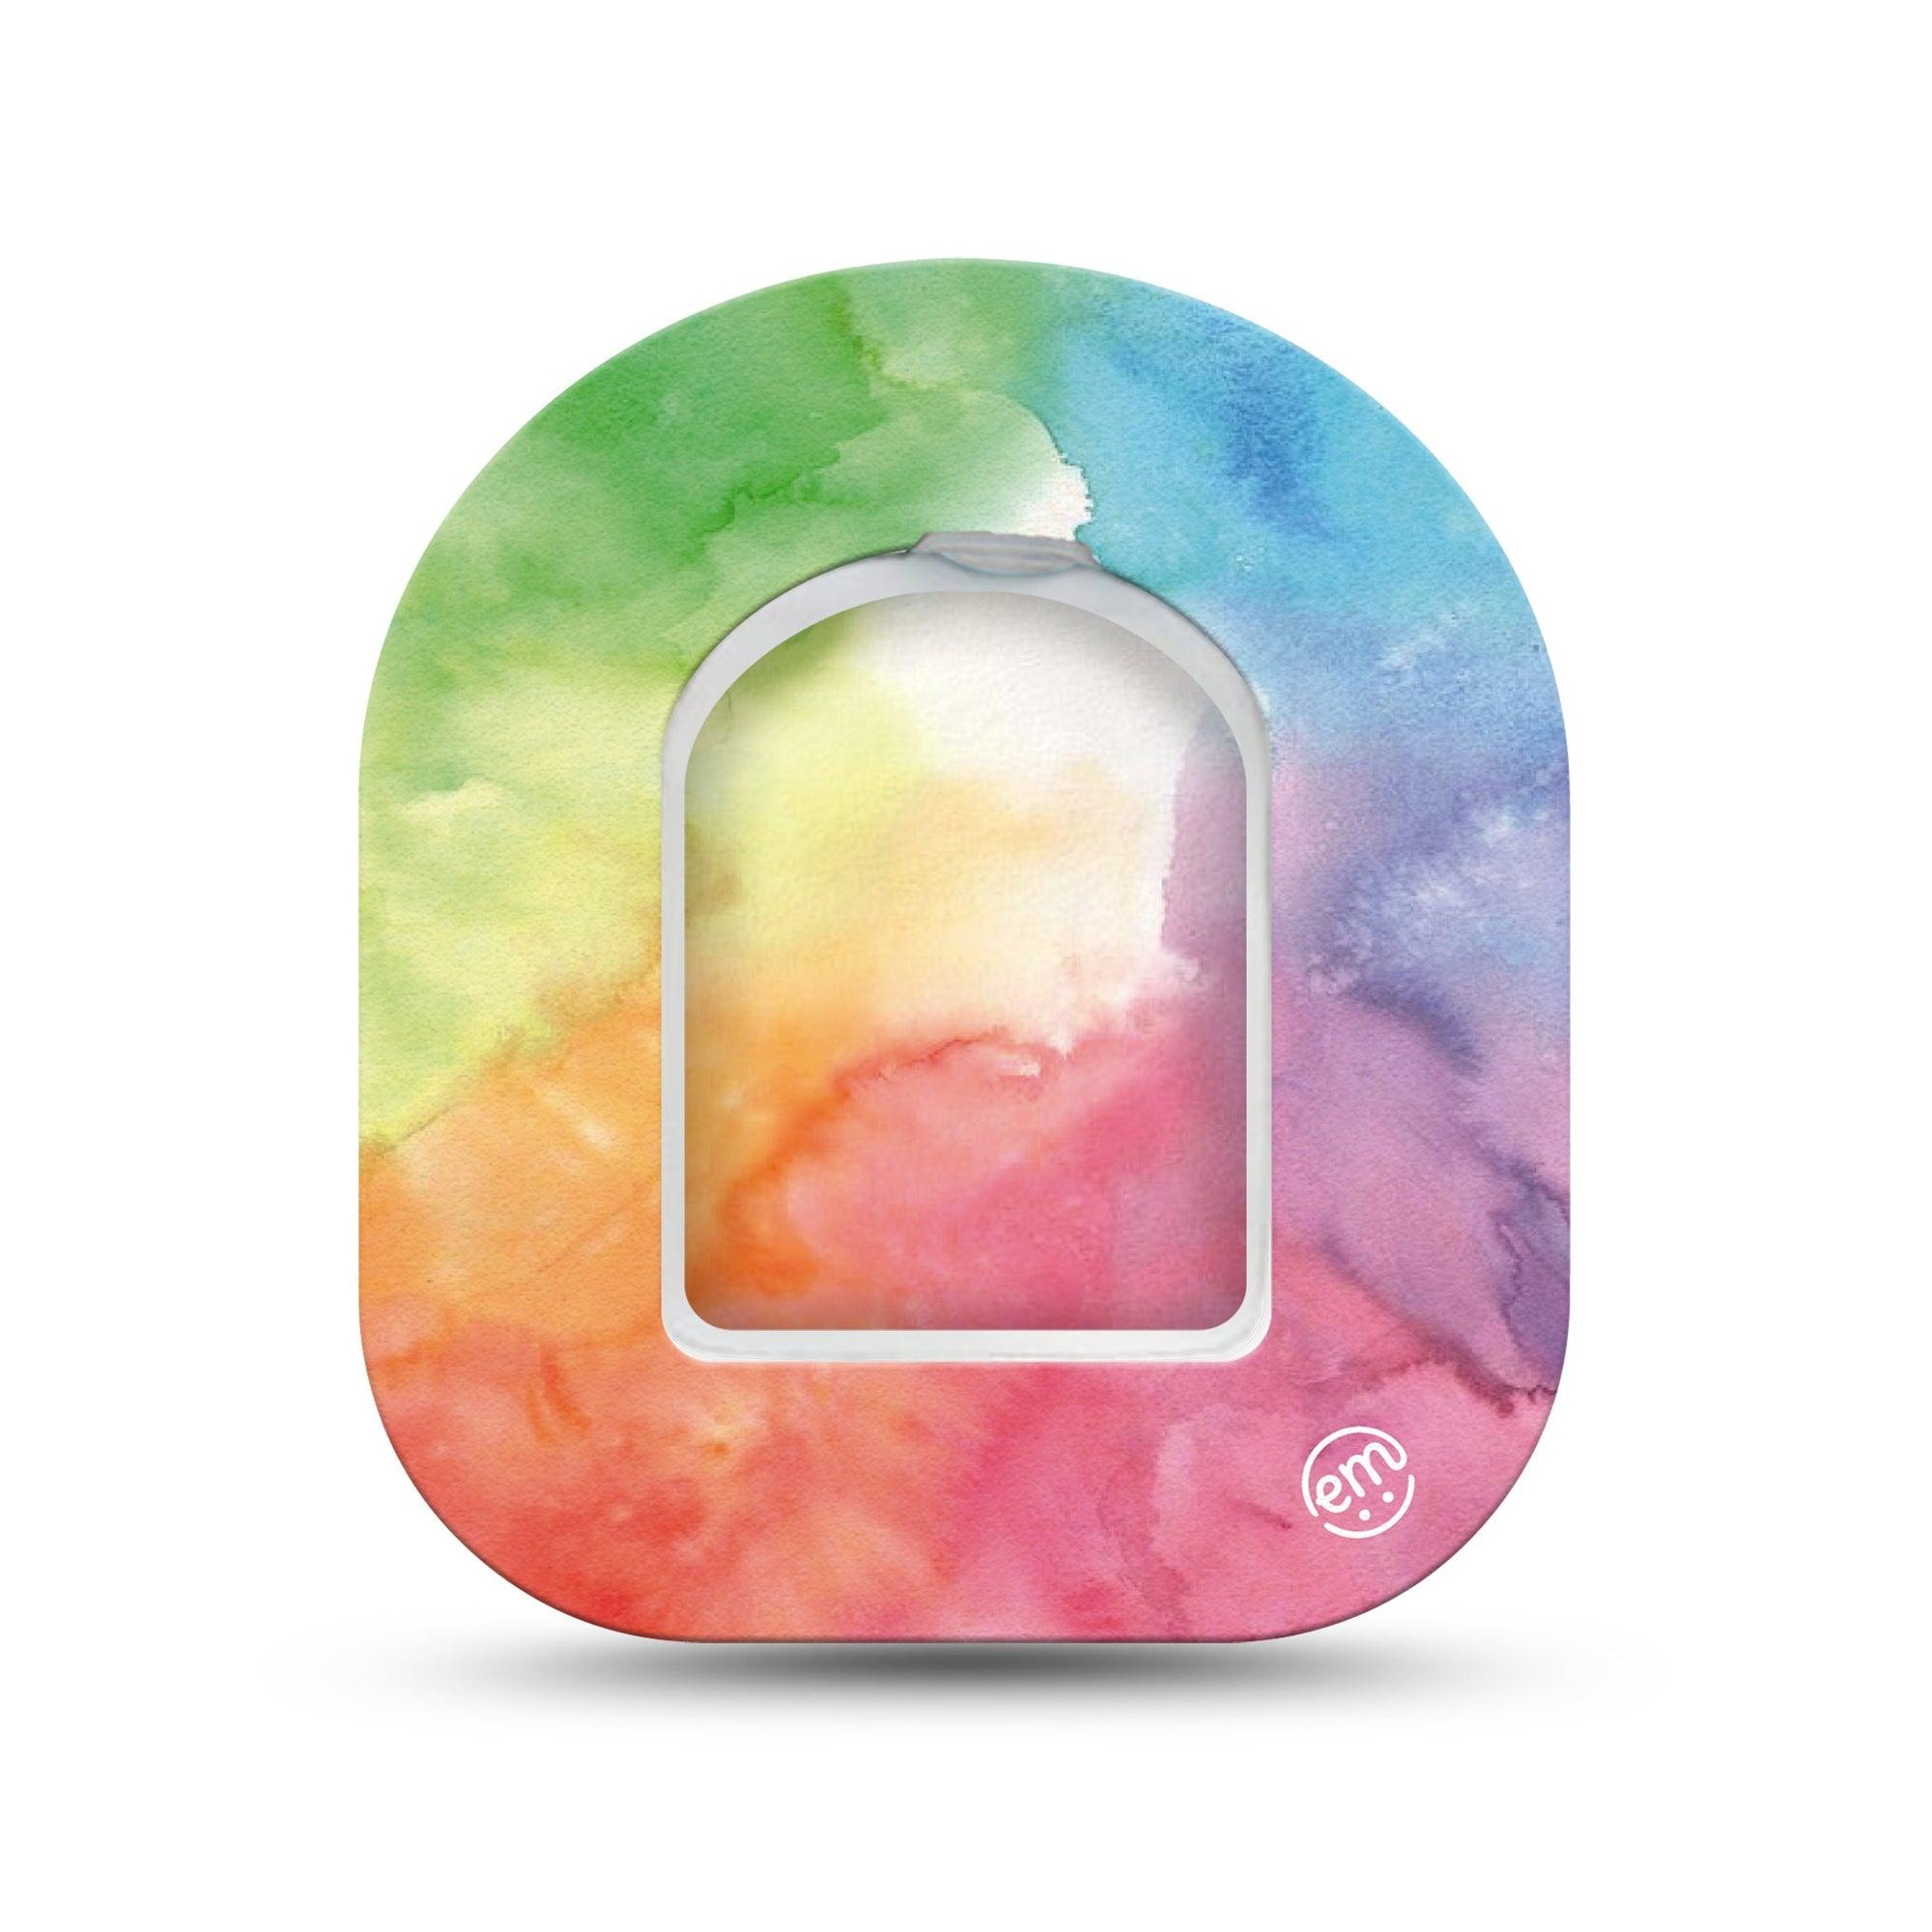 ExpressionMed Rainbow Clouds Omnipod Surface Center Sticker and Mini Tape Rainbow Watercolor Clouds Vinyl Sticker and Tape Design Pump Design